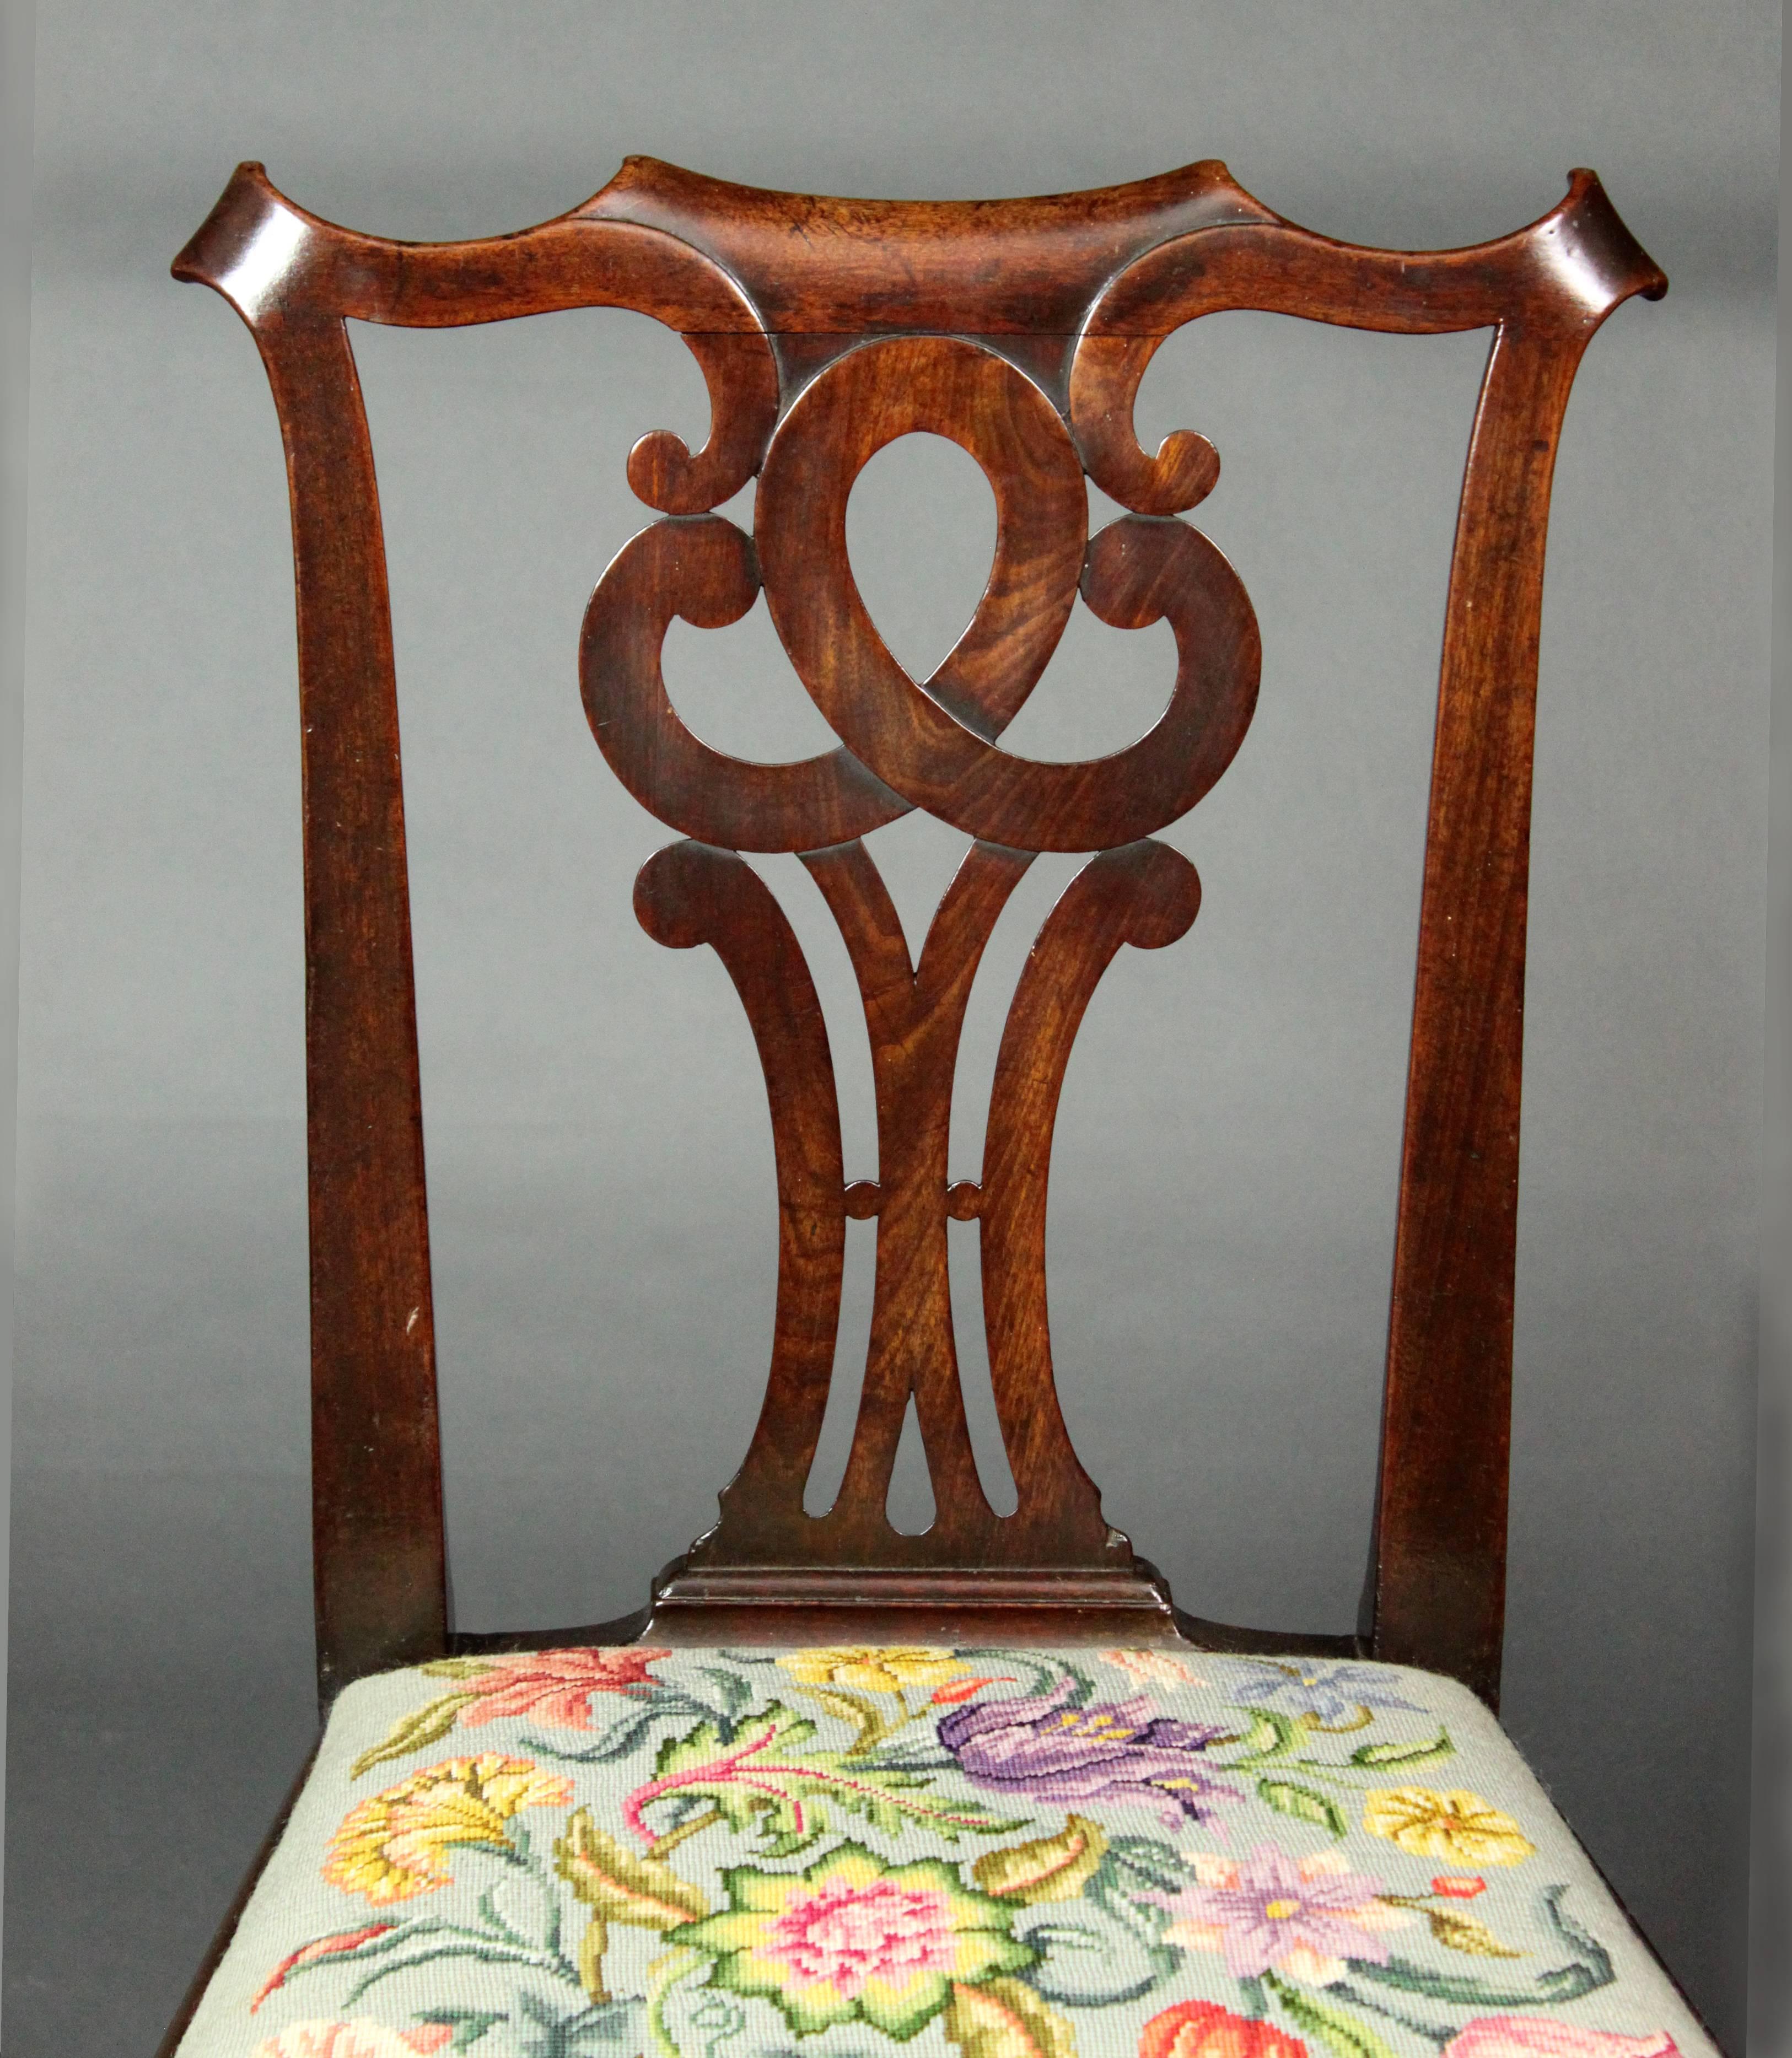 Pair of George II Mahogany Cabriole Leg Chairs In Good Condition In Bradford-on-Avon, Wiltshire